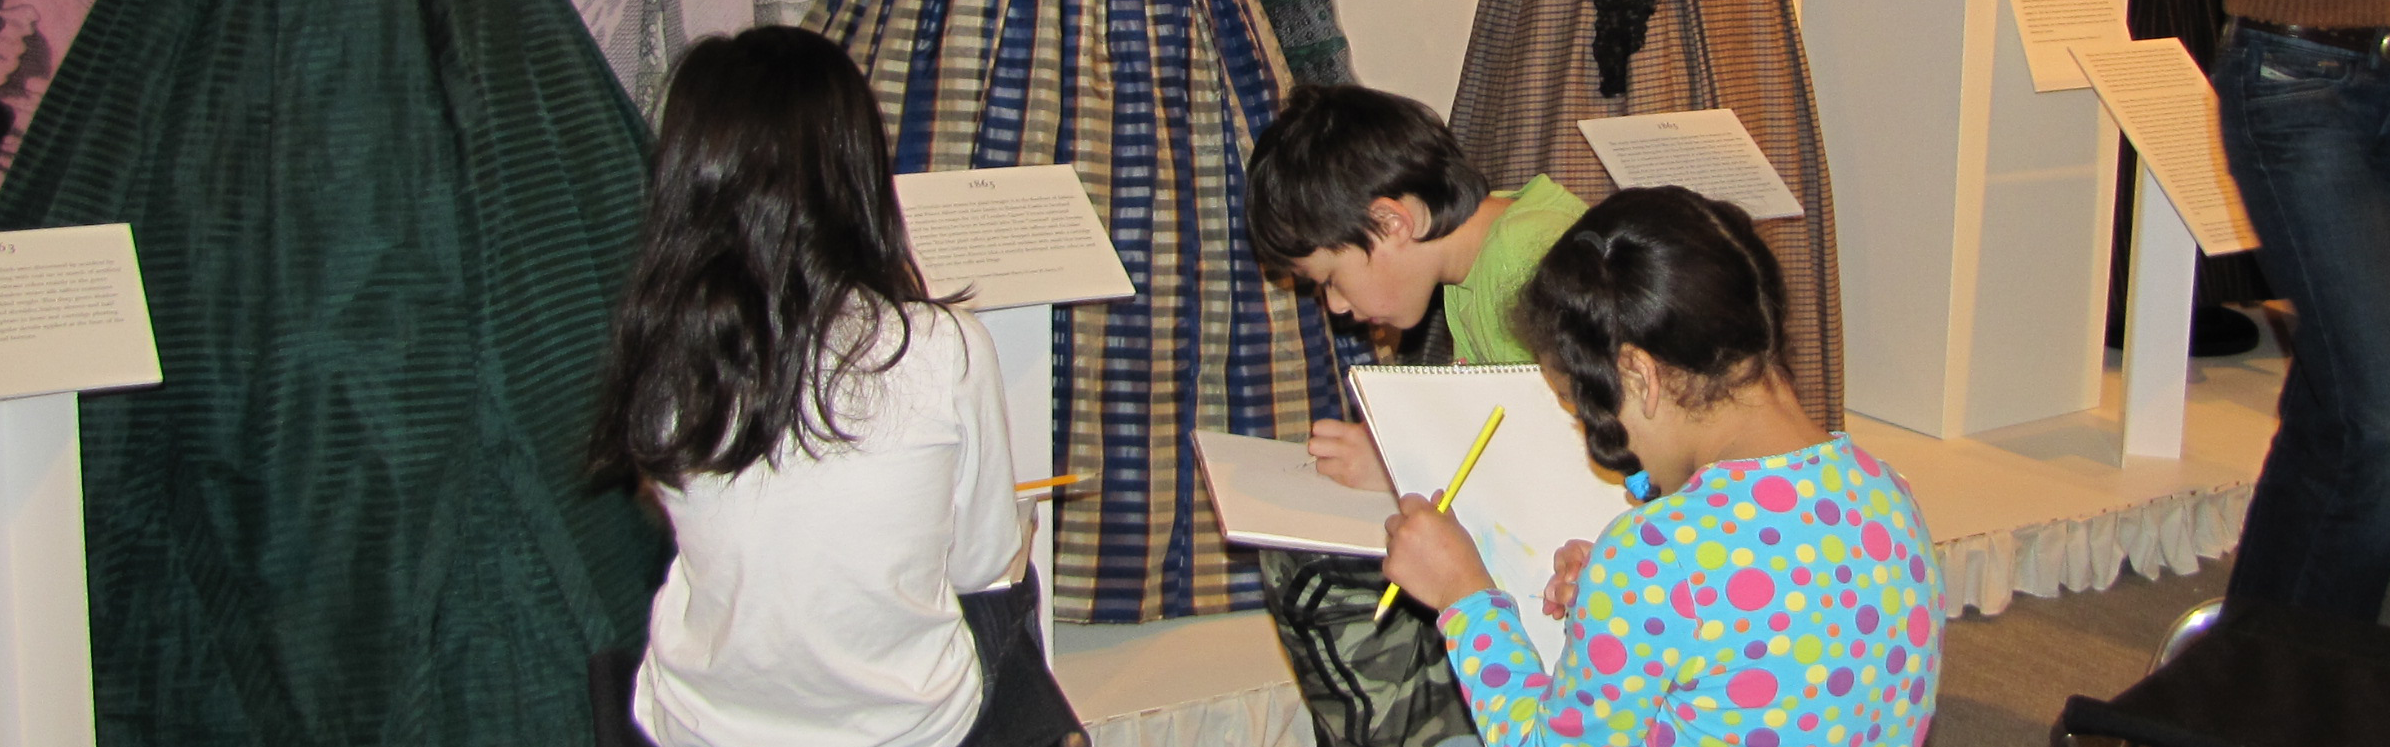 Image of children looking at an exhibit and working on an activity on sheets of paper.